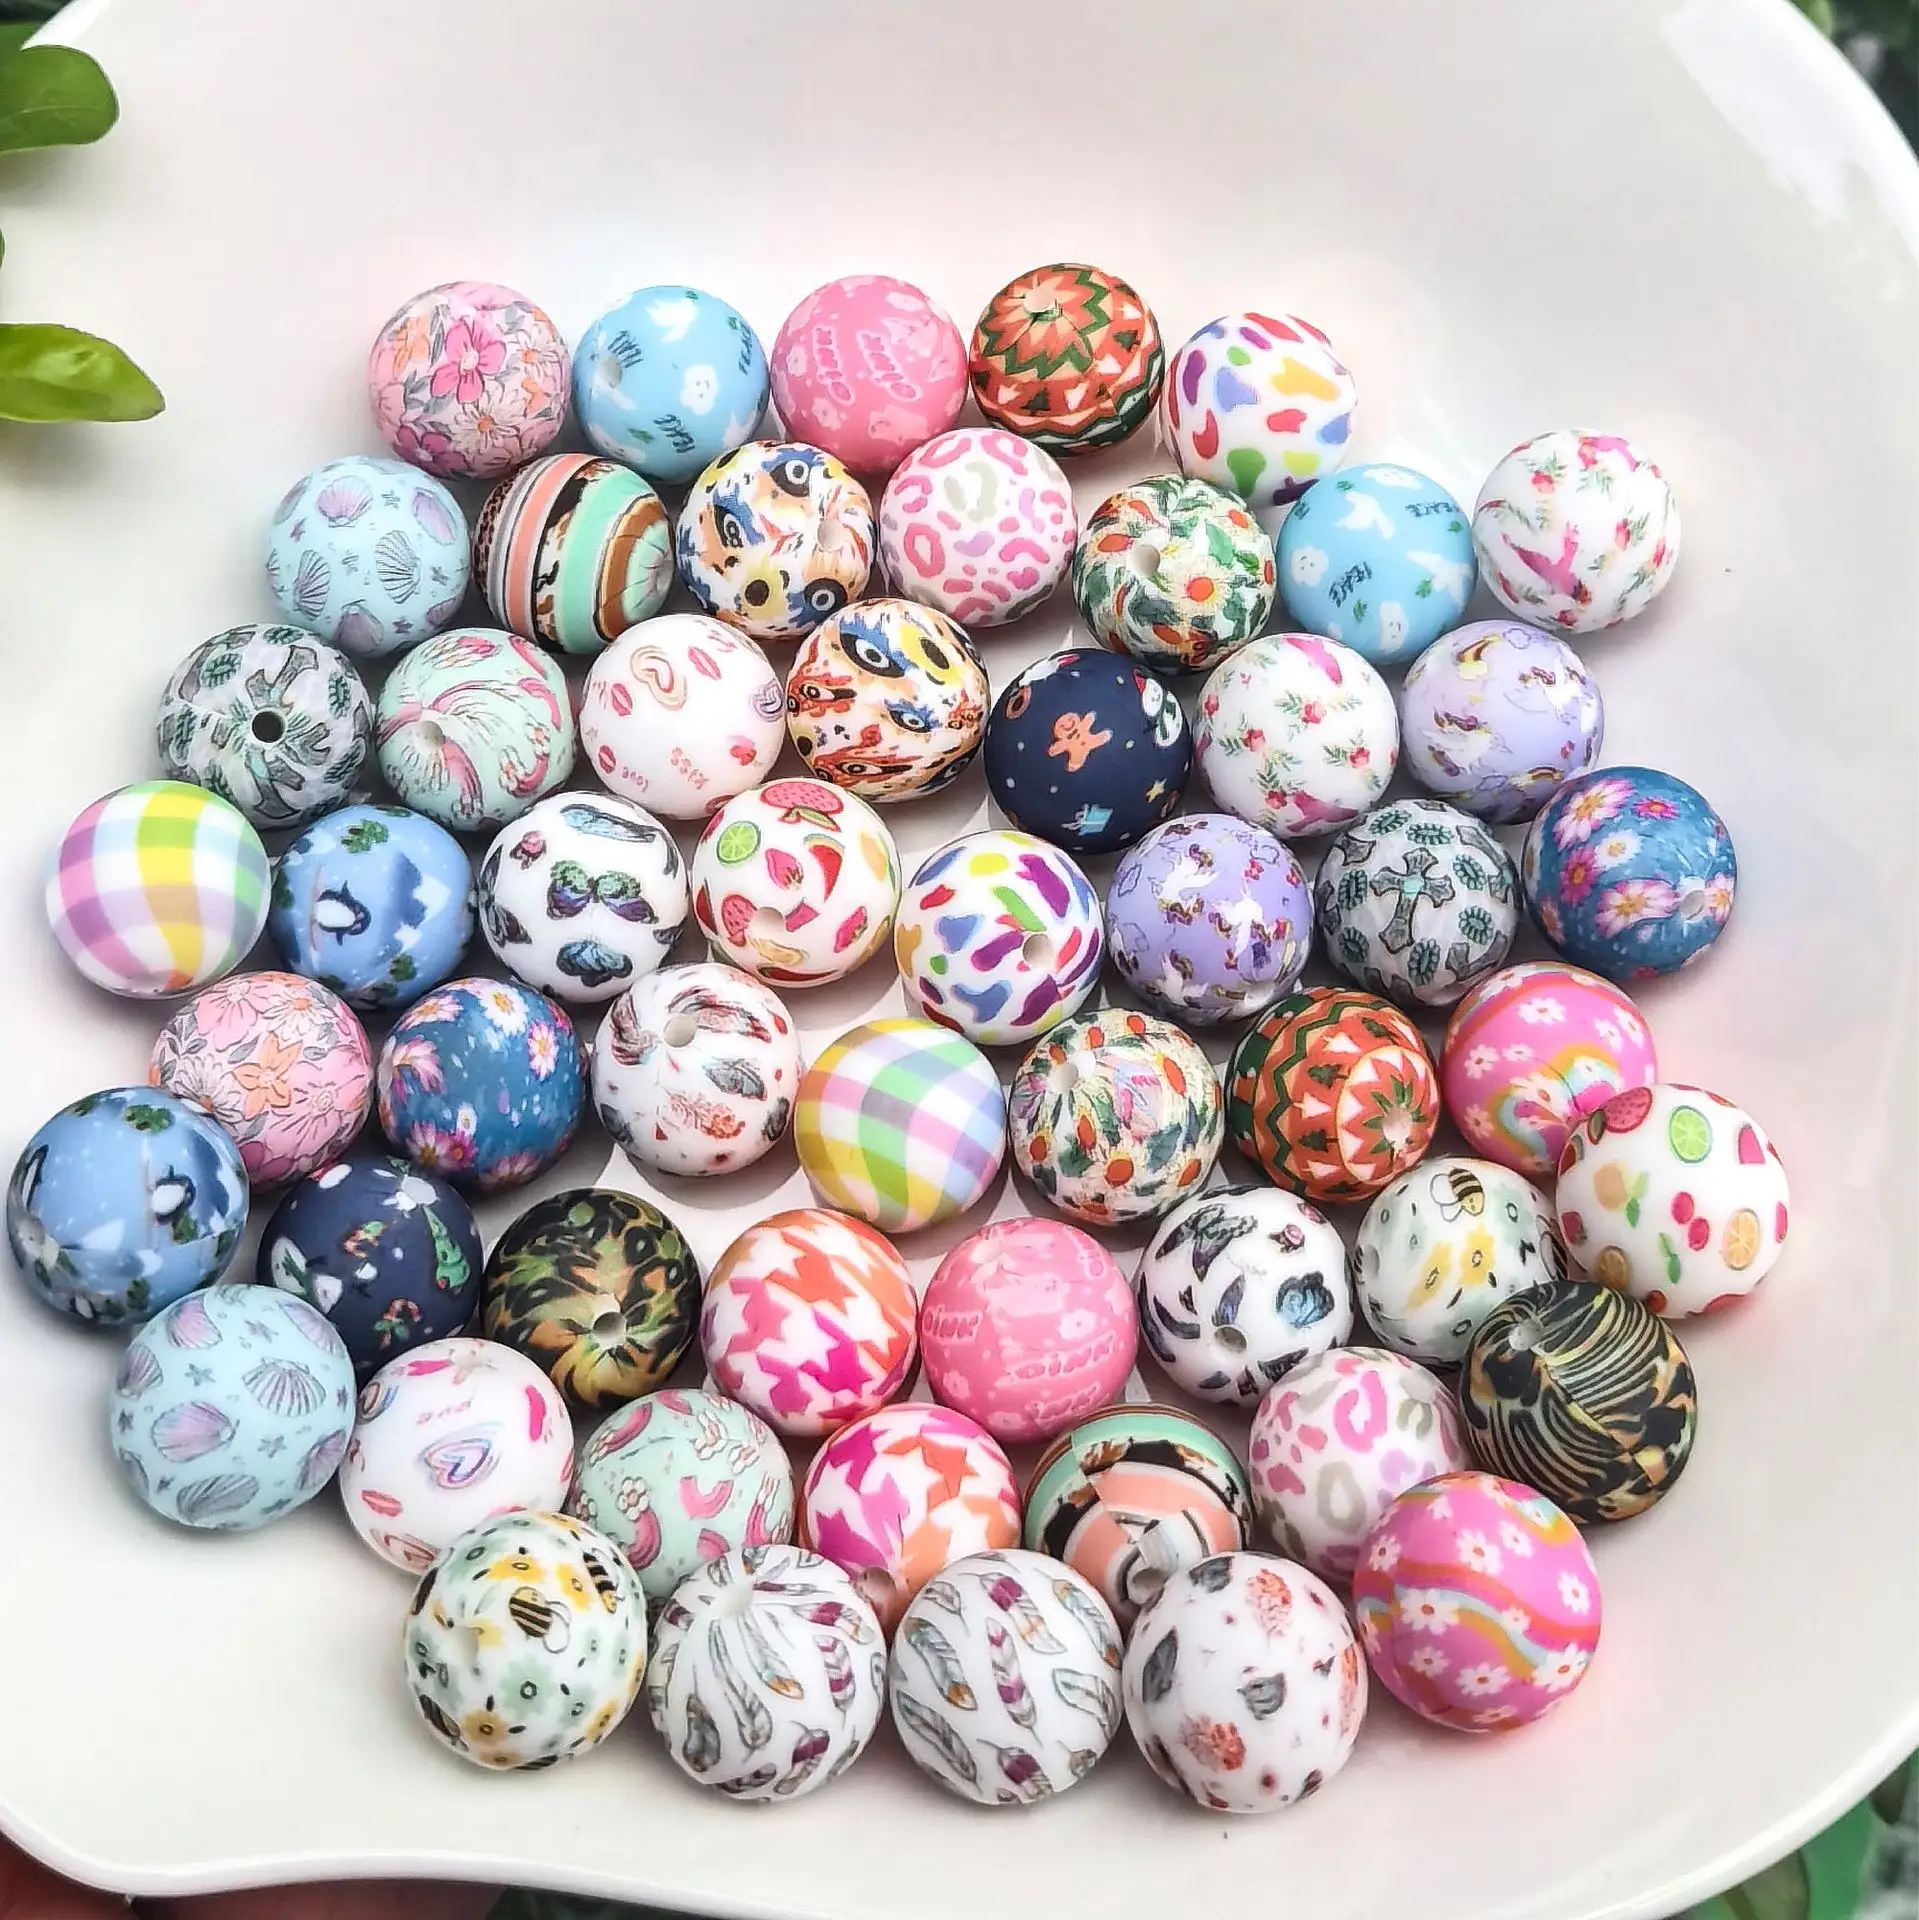 400 colors Food Grade Leopard Print 15mm Silicone Focal Printed Beads Chewable Teething Beads For Pen keychain teether toys